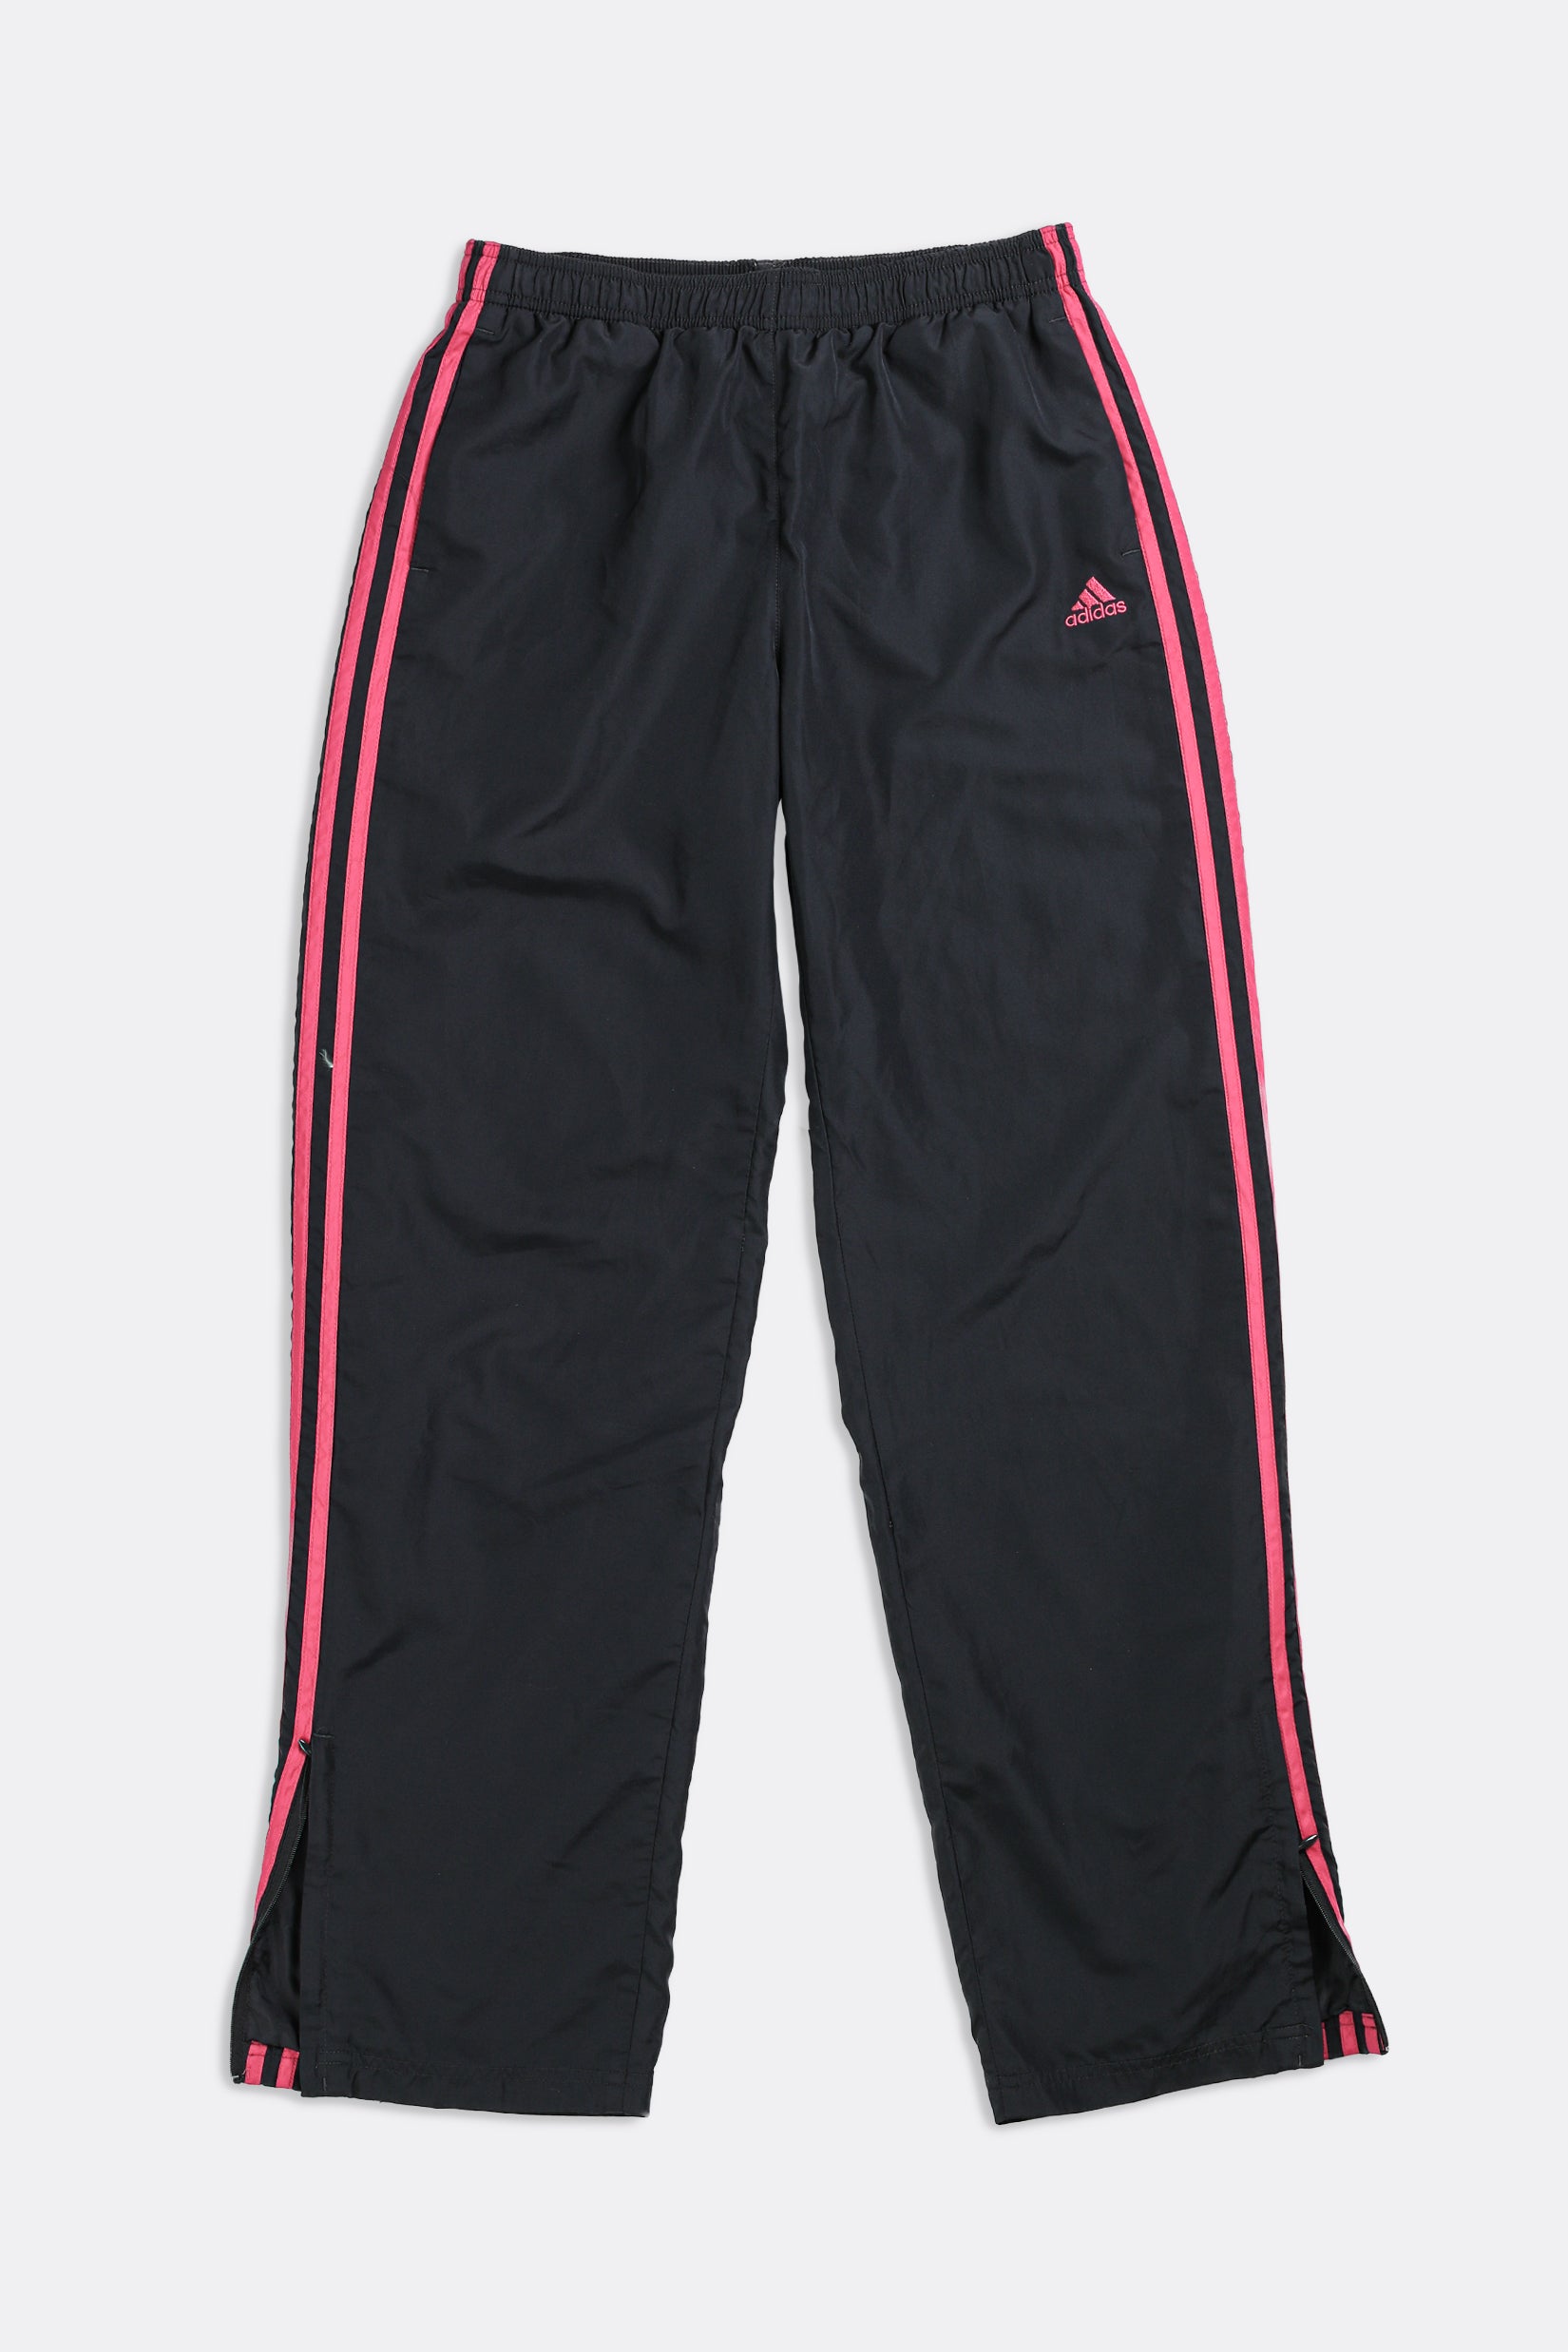 Adidas Response women wind pants black and pink detail zip ankles. Size M.  Used.